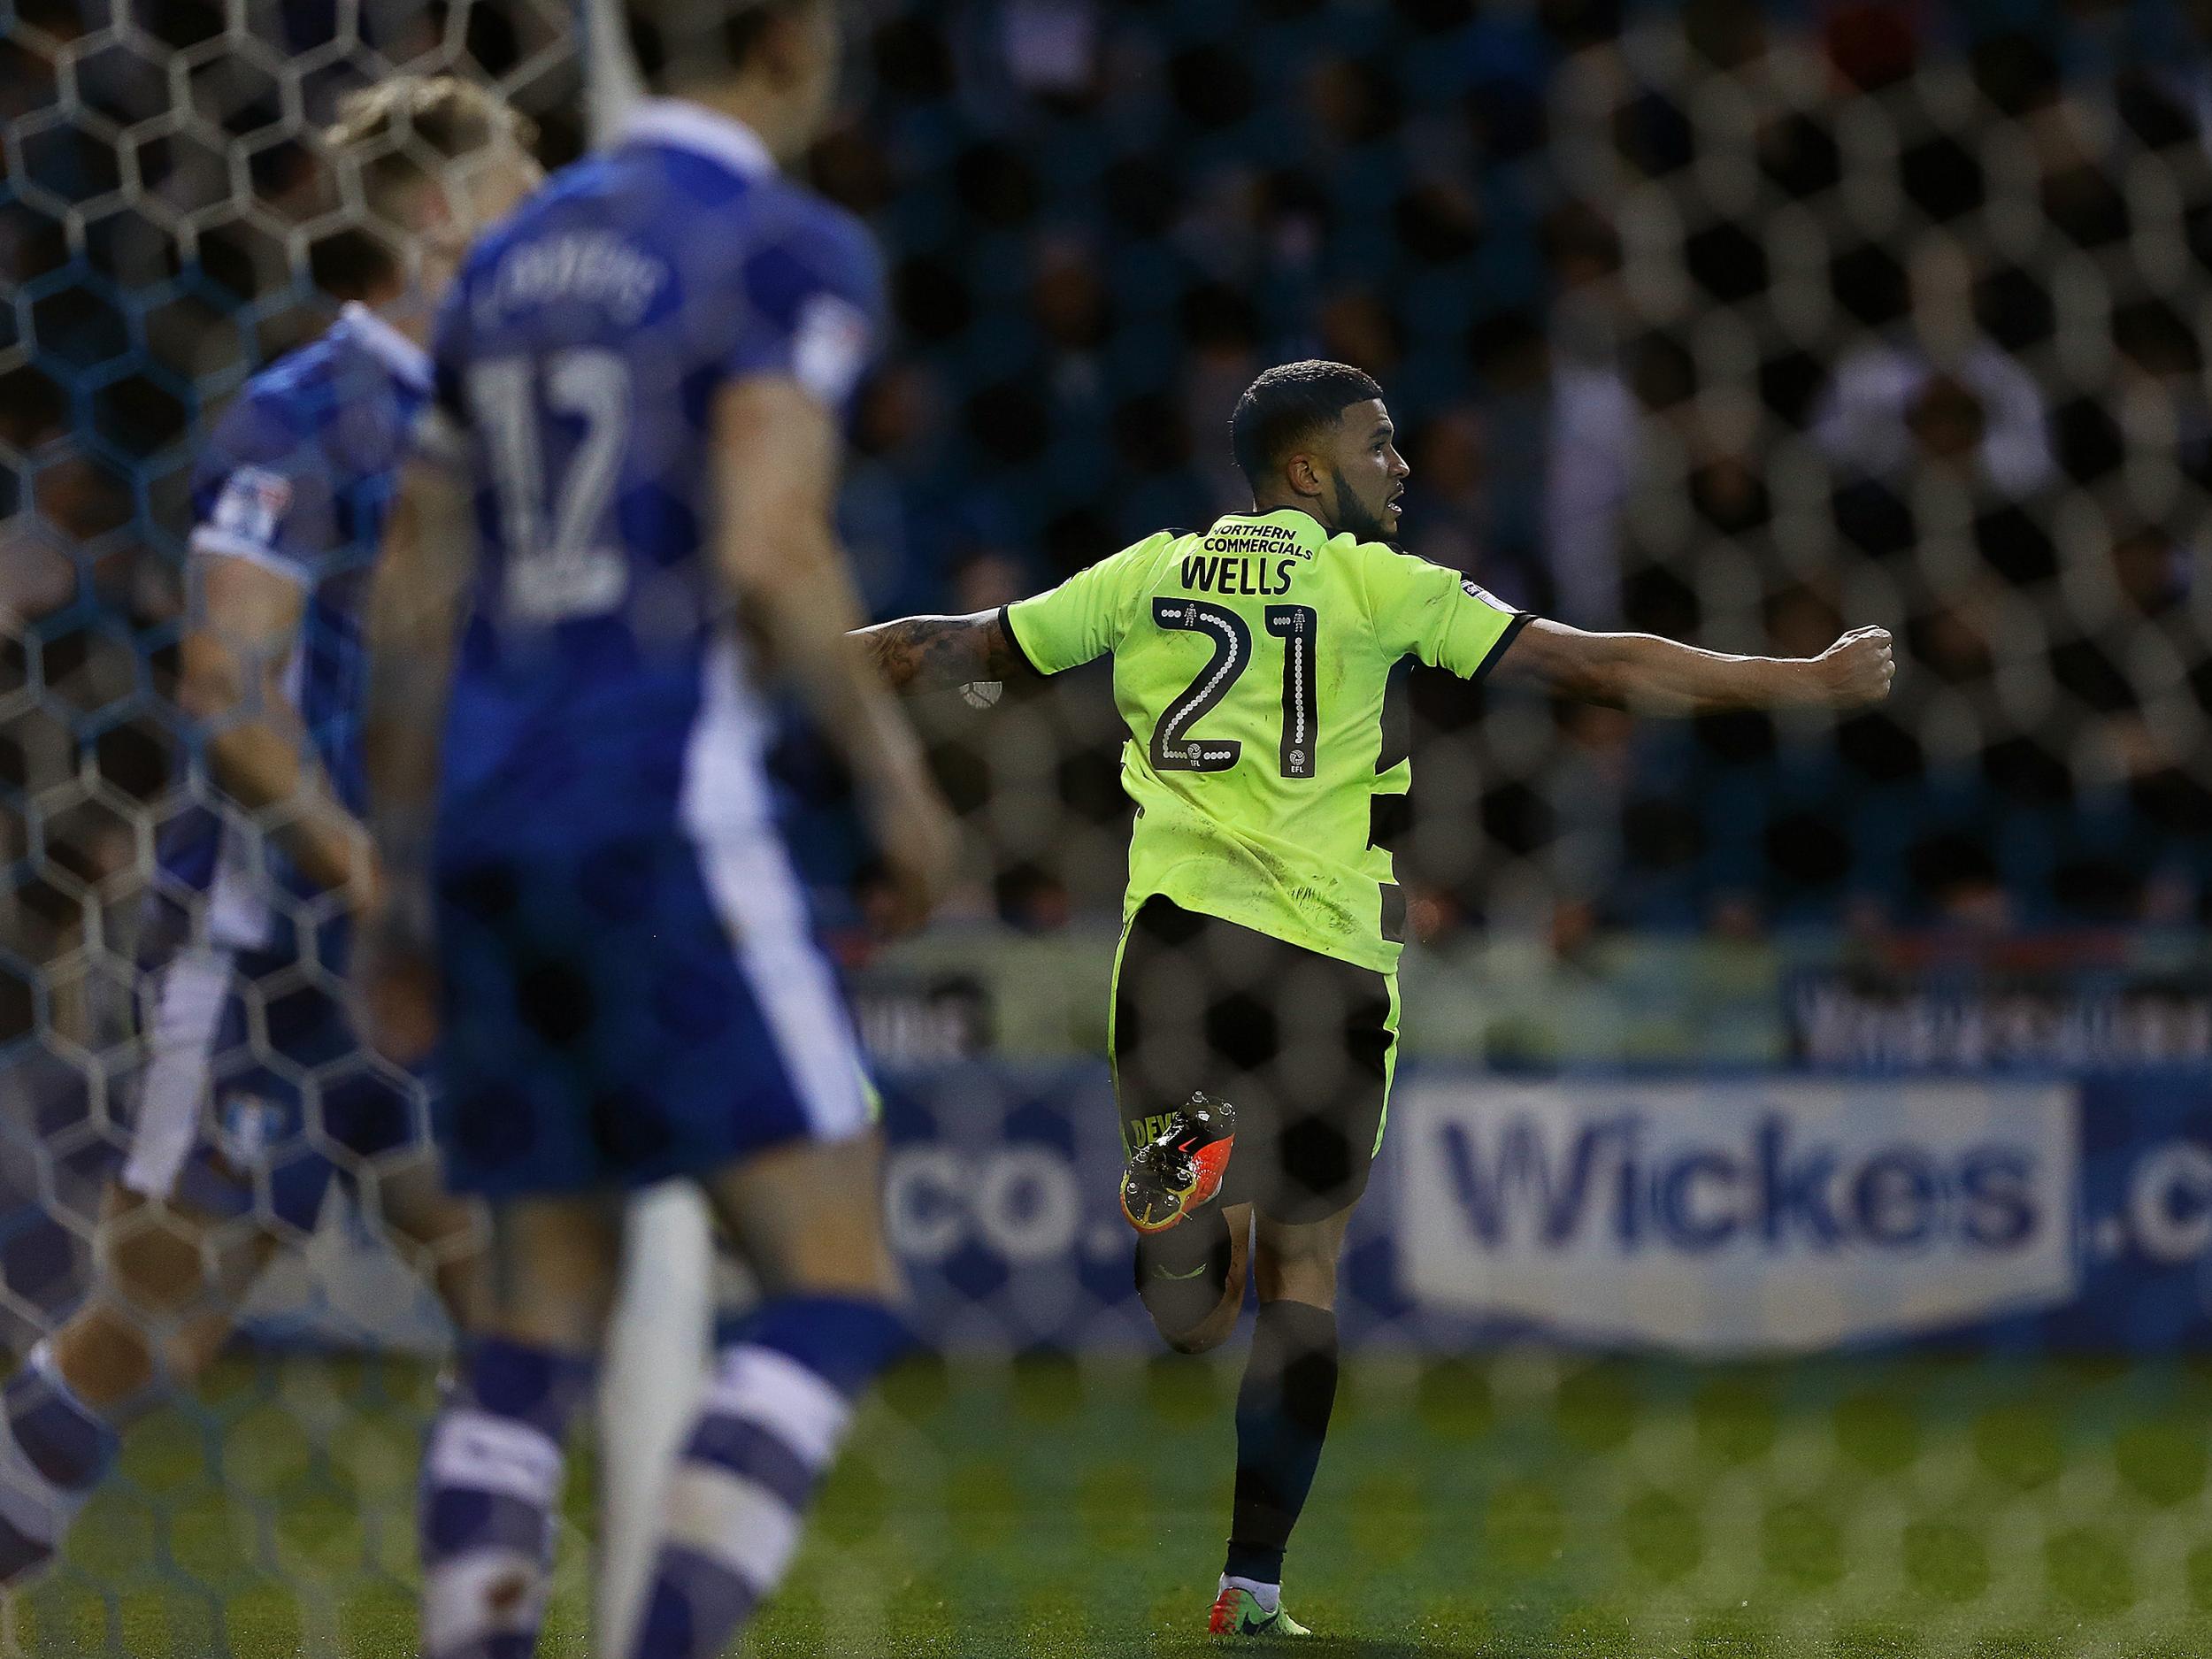 Wells kept Huddersfield in the match with a late goal